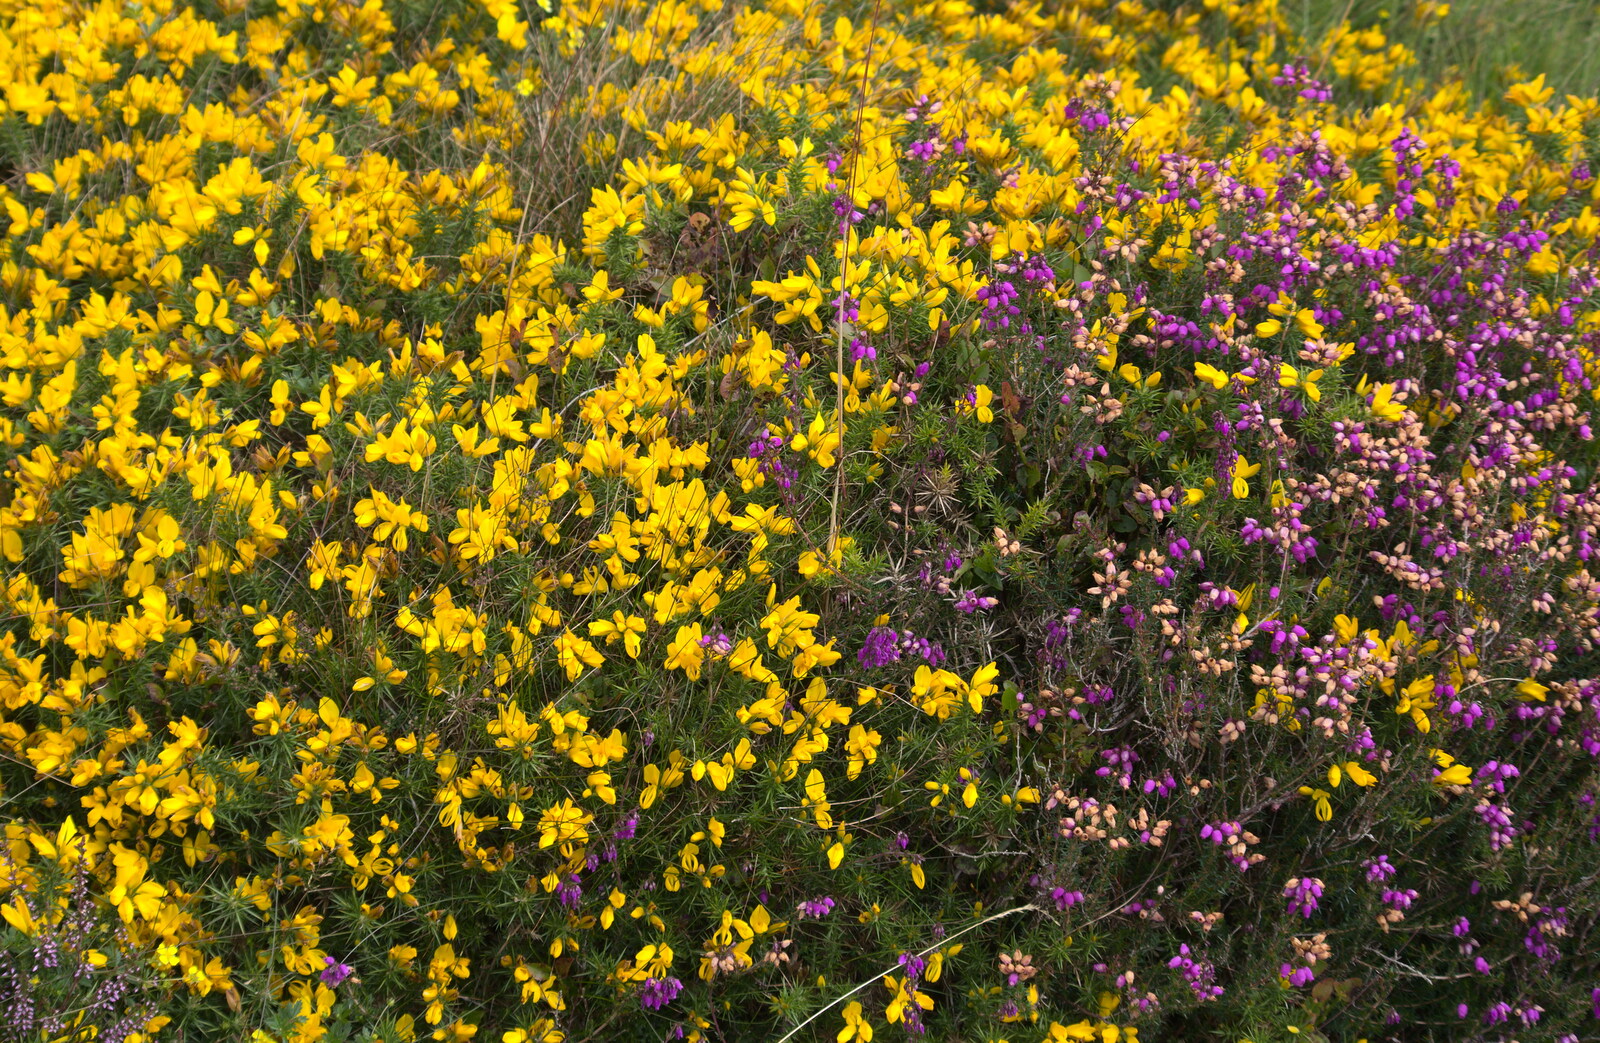 Yellow gorse and purple heather from Badger's Holt and Bronze-Age Grimspound, Dartmoor, Devon - 10th August 2016